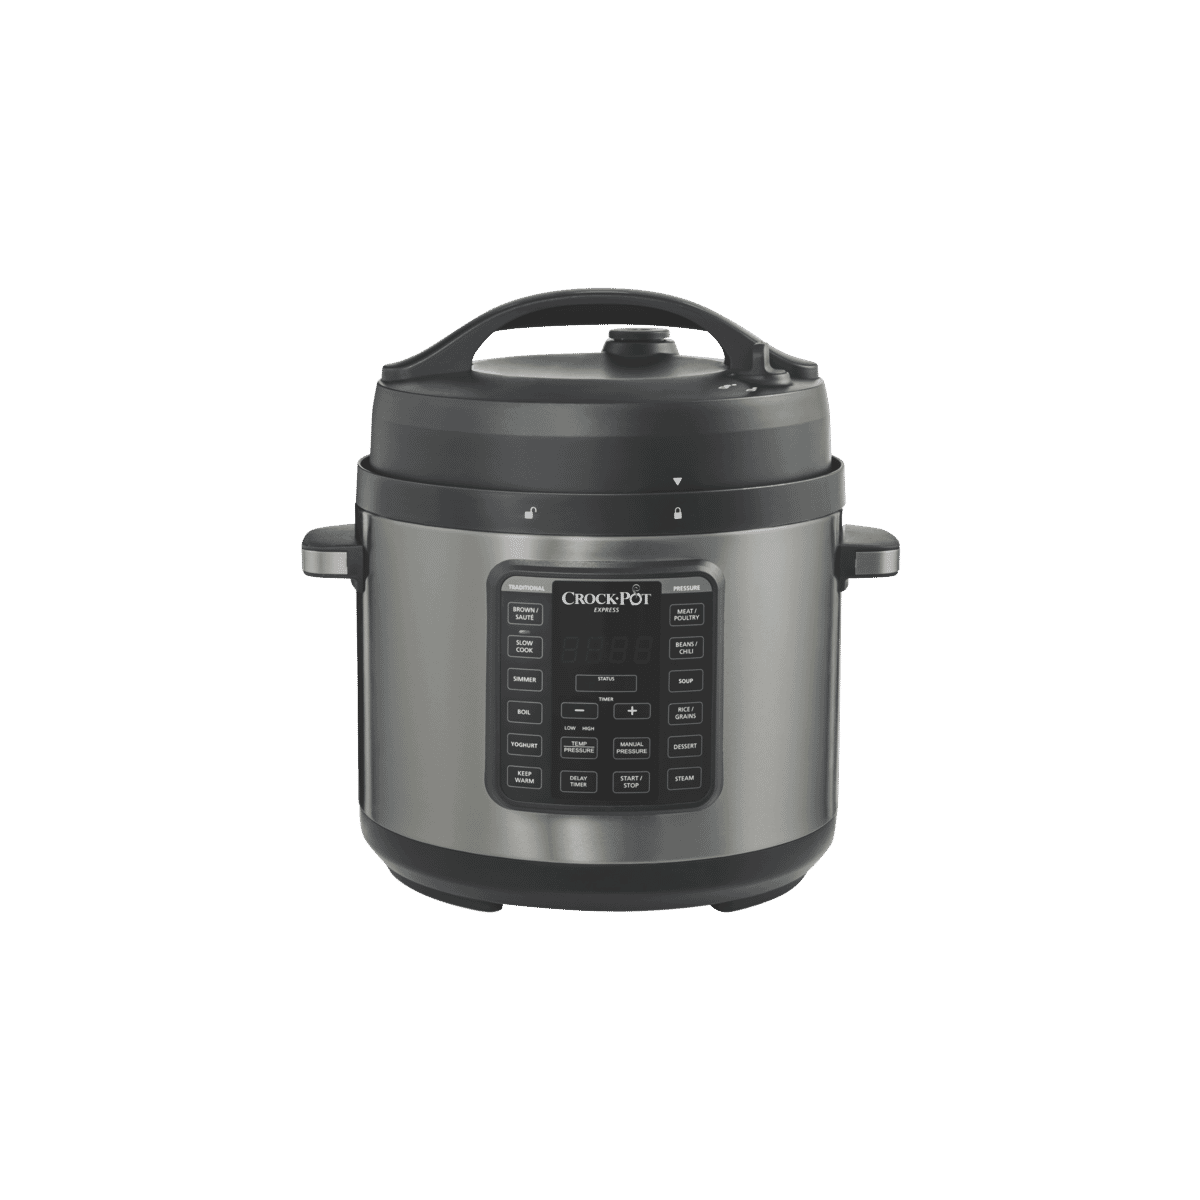 Crock Pot CPE210 Express Easy Release Multi-Cooker at The Good Guys